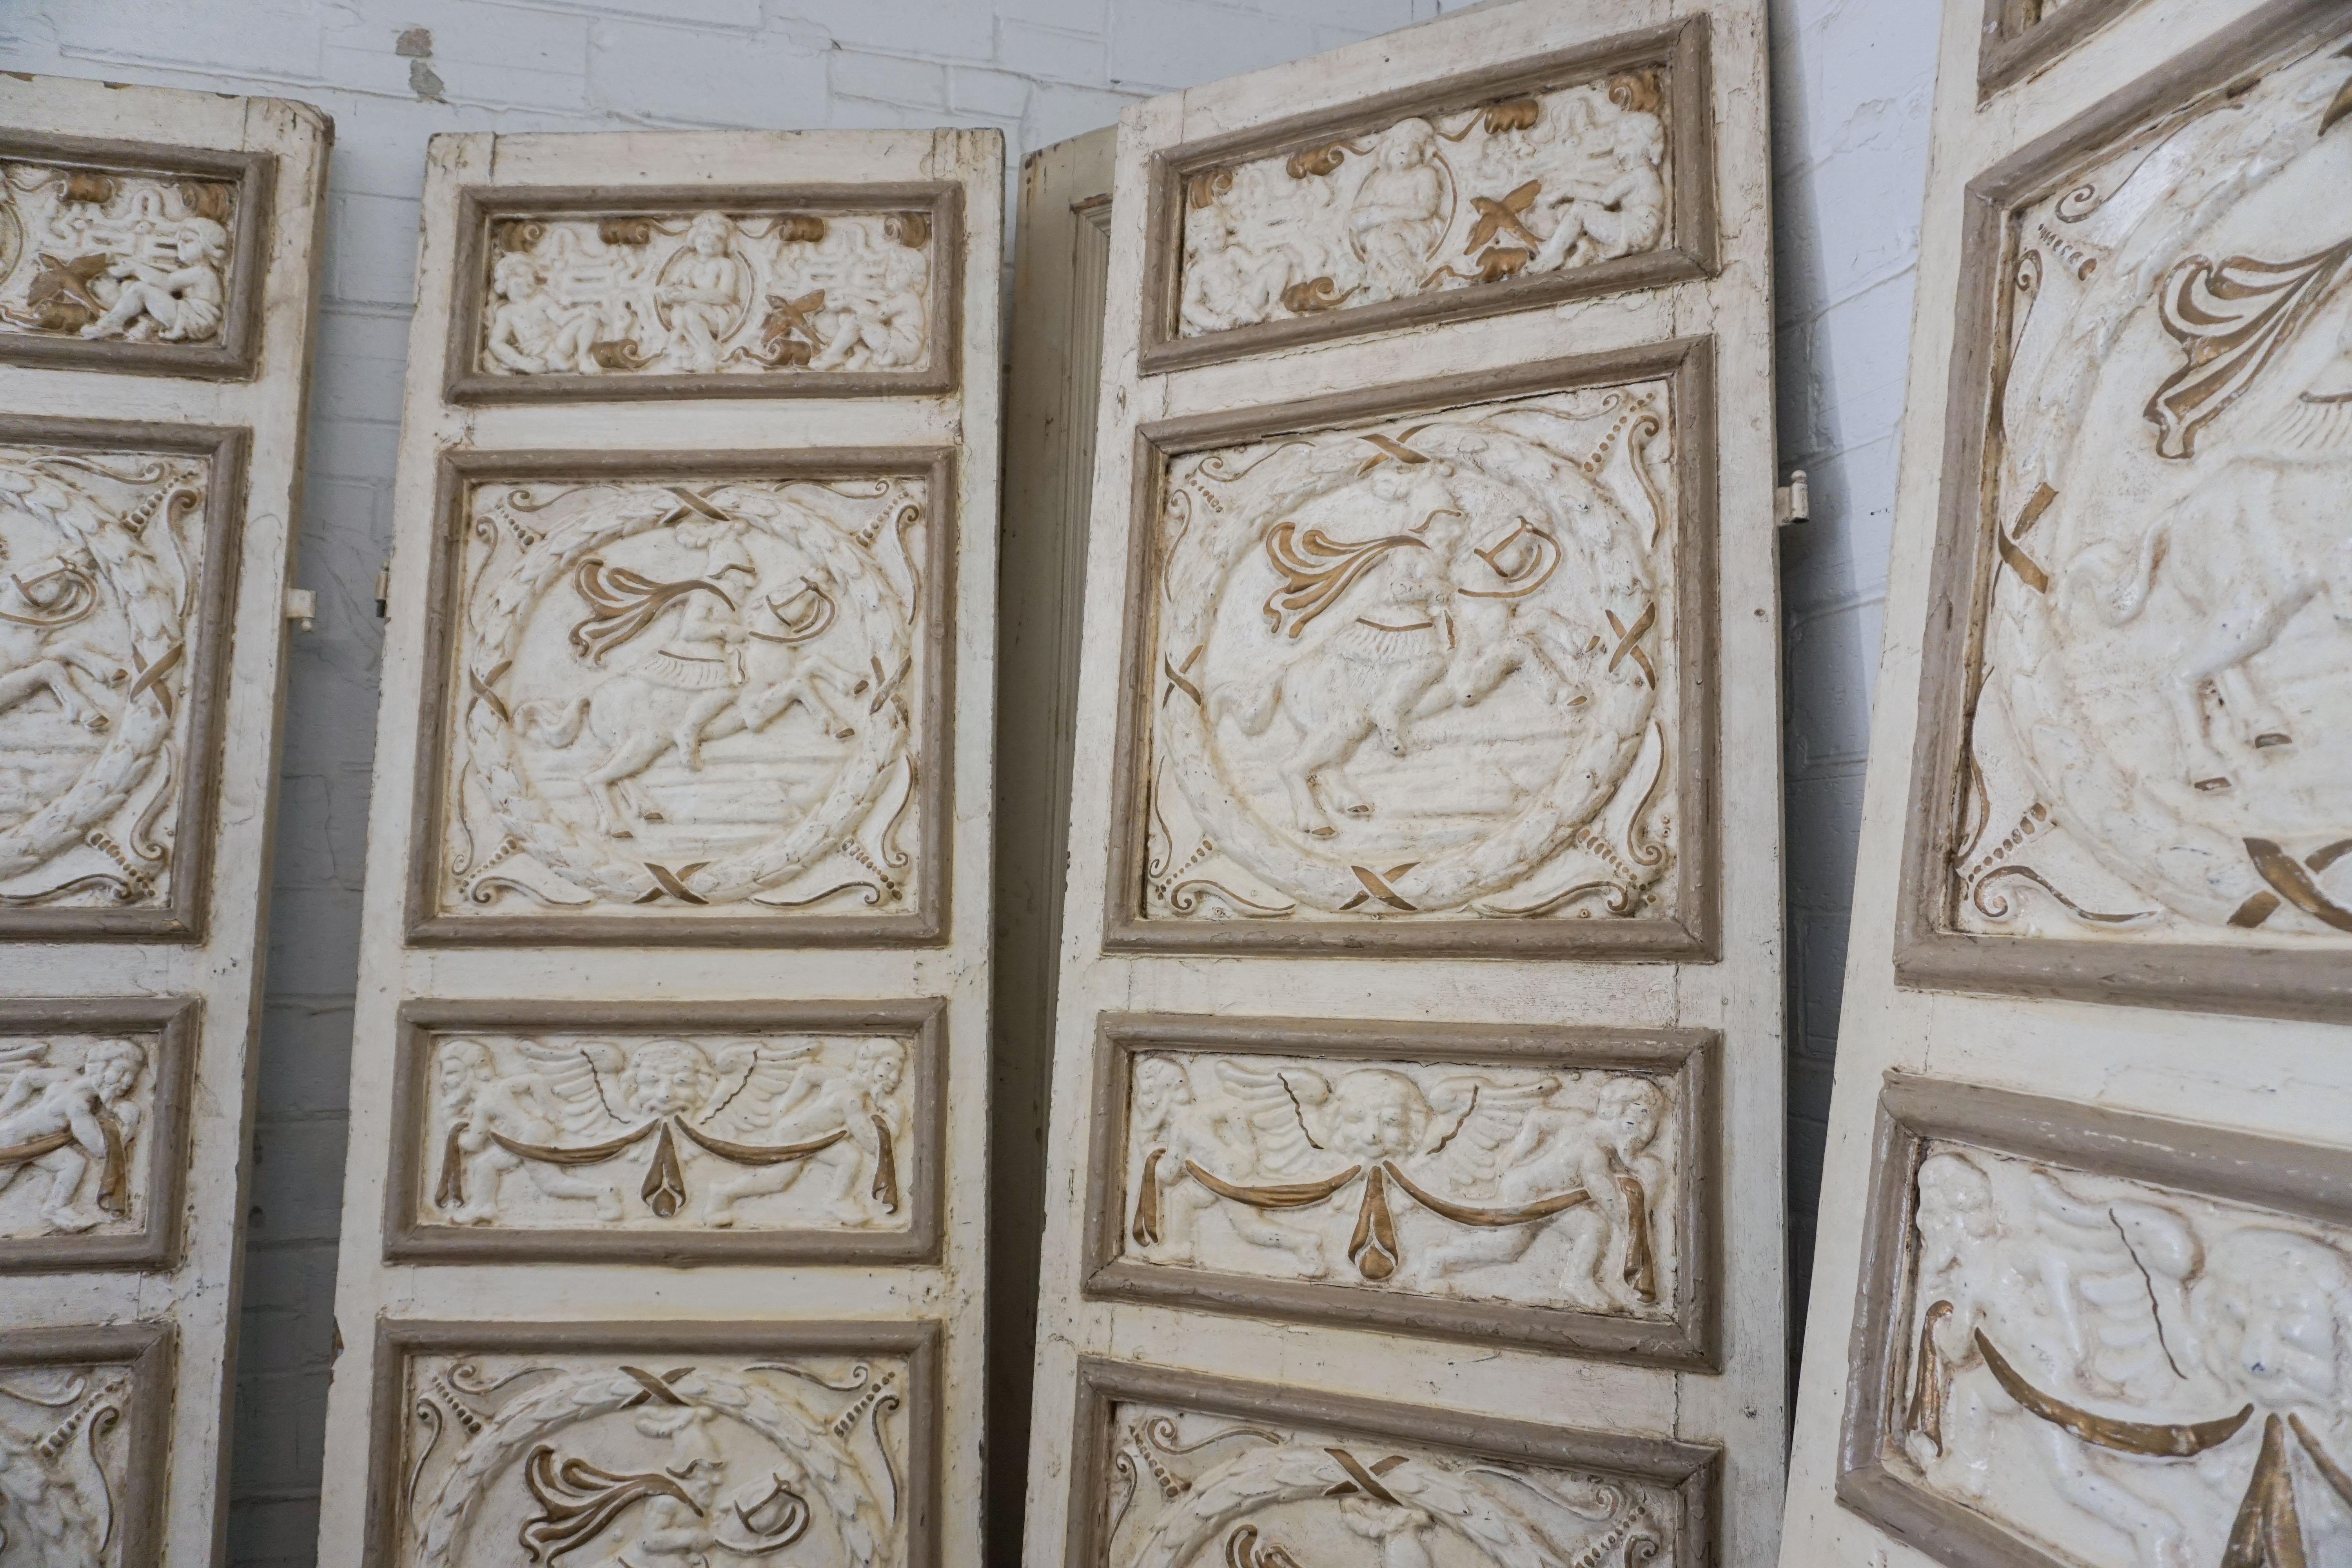 These ornate doors feature design on both sides. Four total in set.

Measurements: 93.5'' H x 27.5.